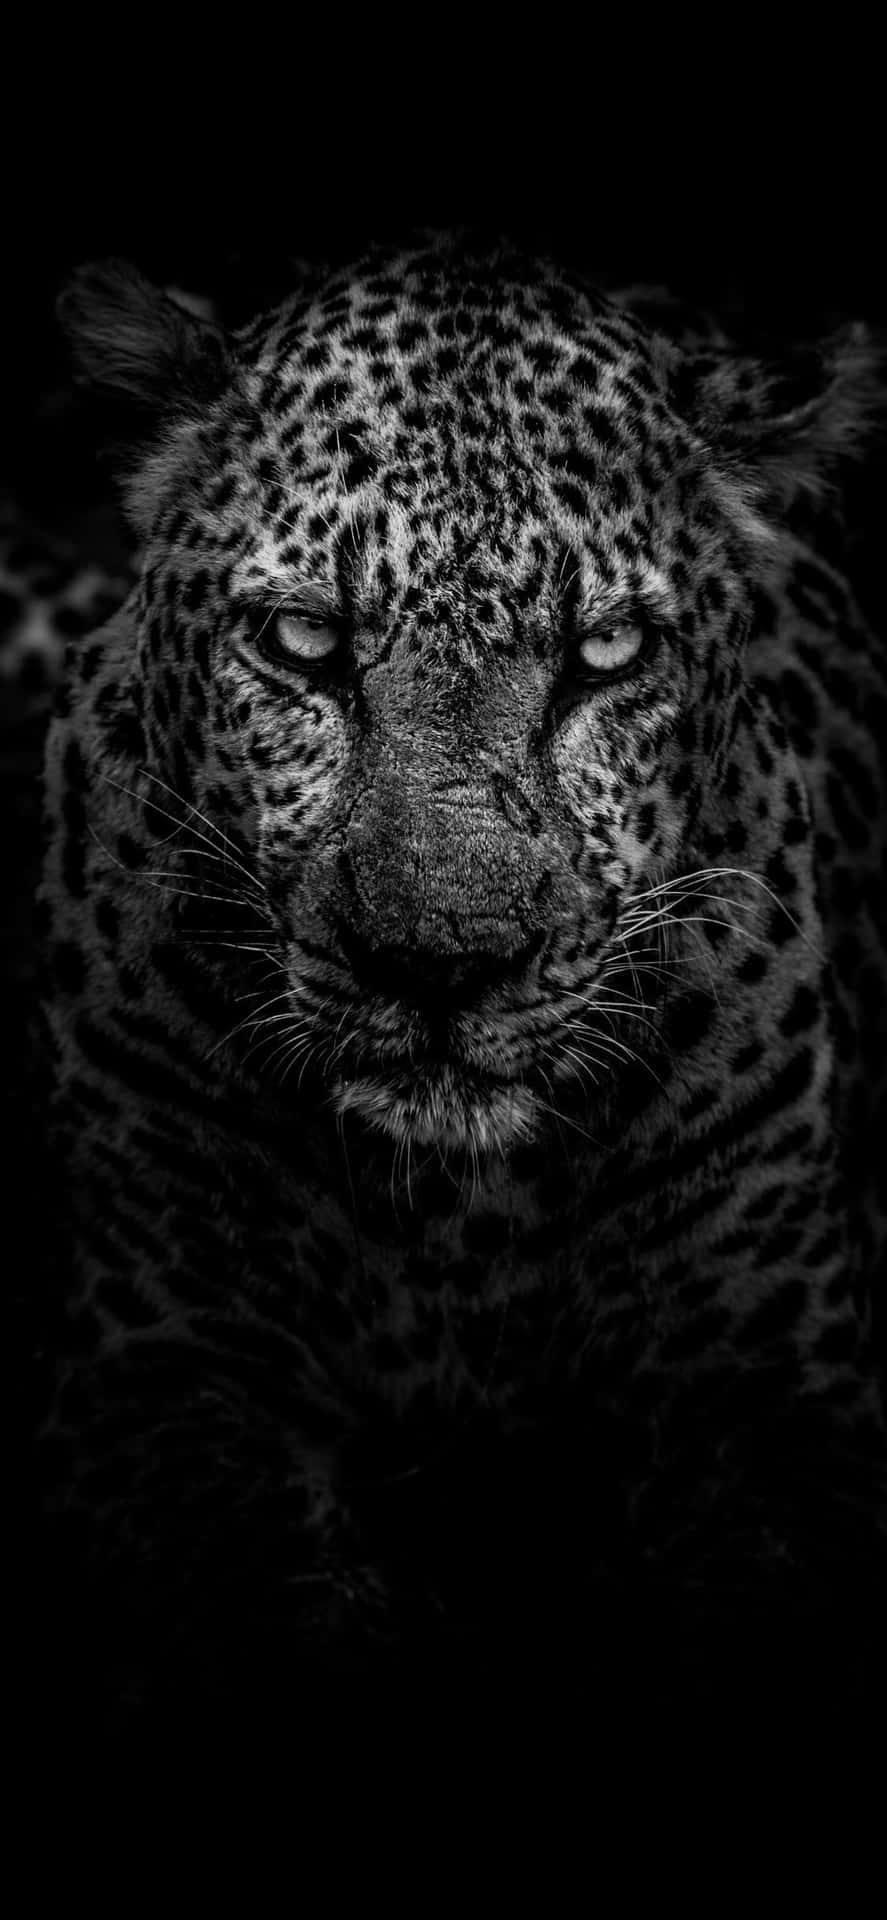 A Leopard In The Dark With Its Eyes Open Wallpaper